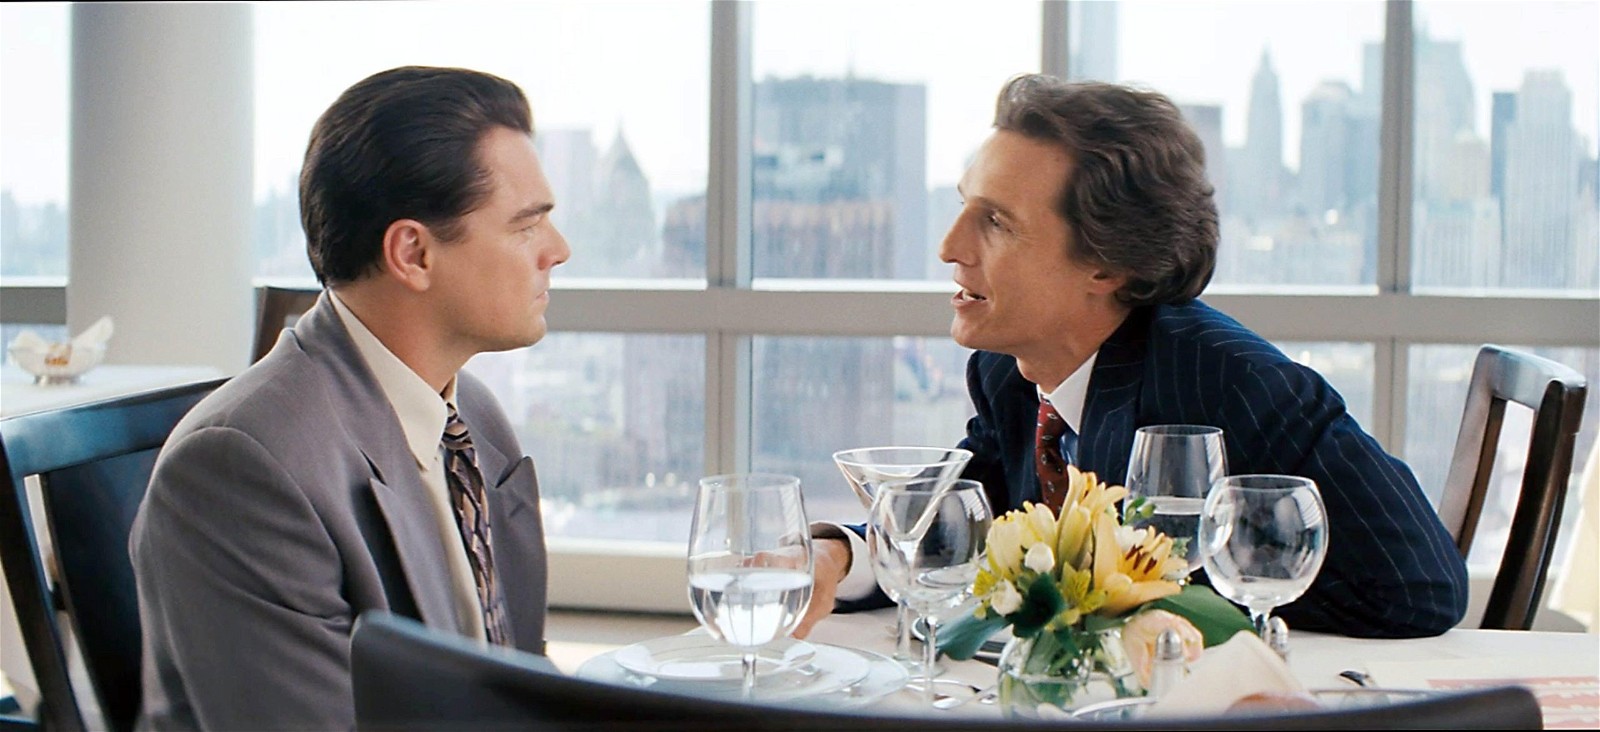 Matthew McConaughey with Leonardo DiCaprio in The Wolf of Wall Street